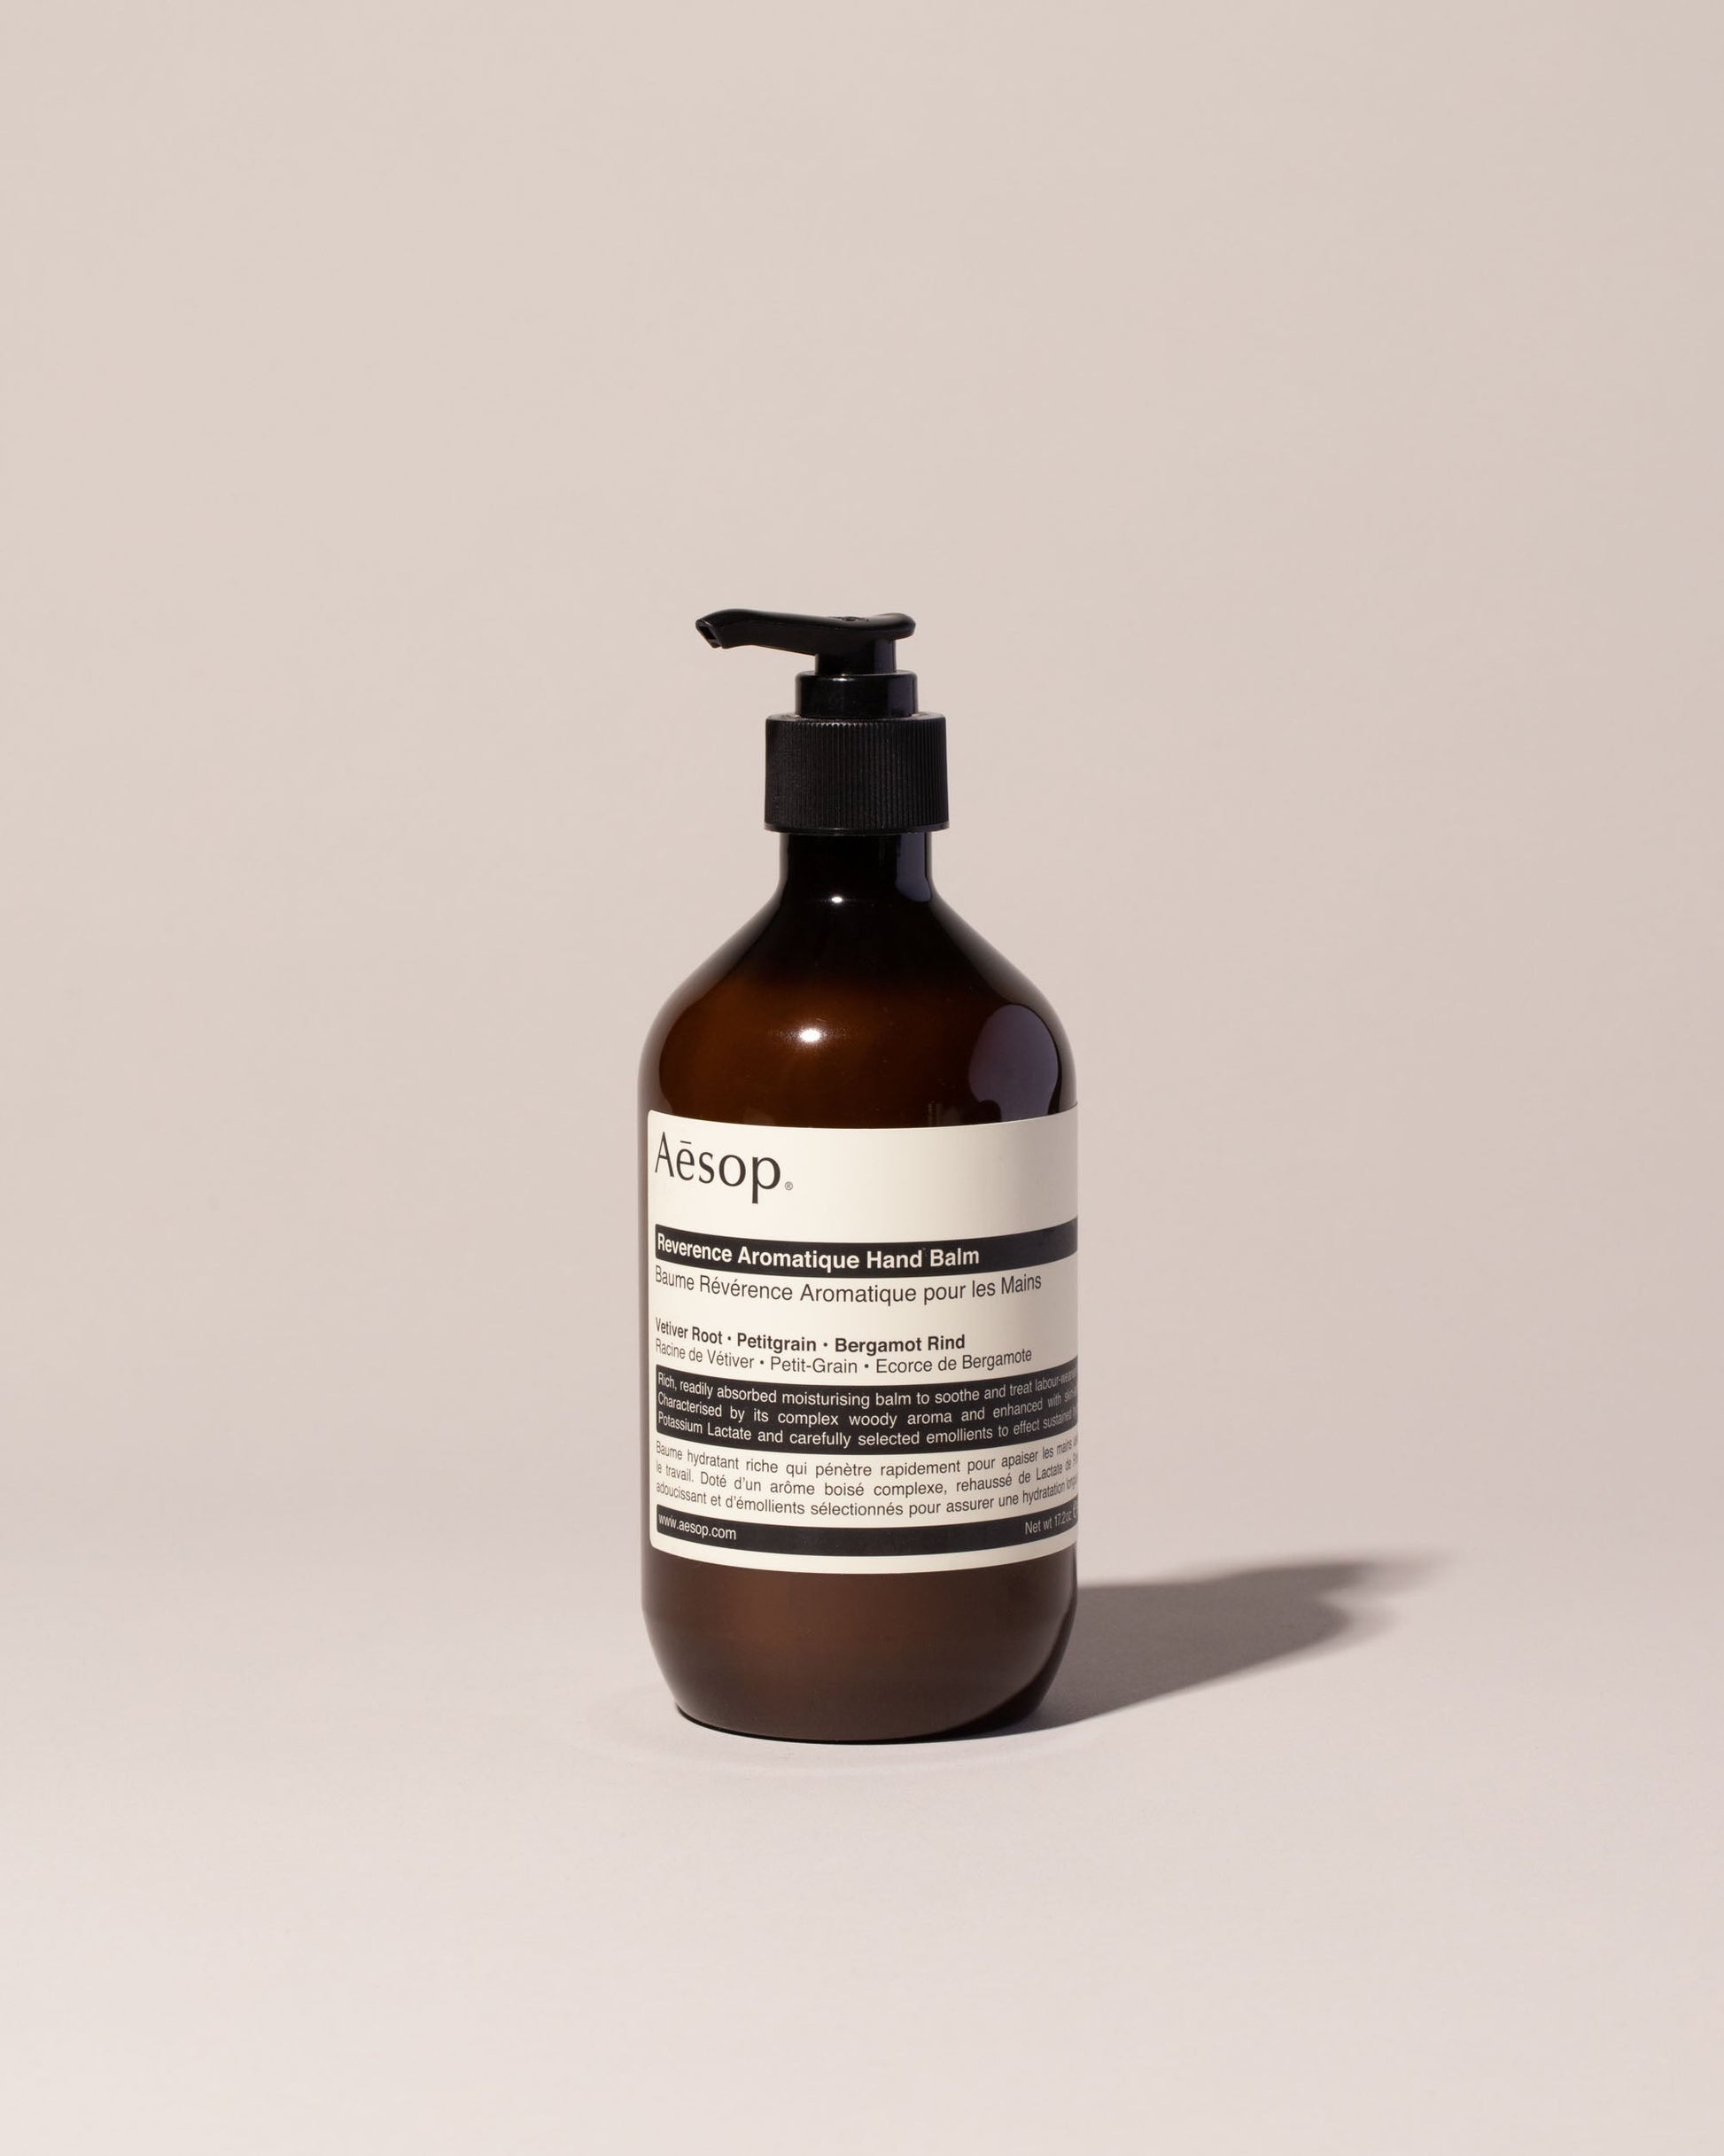  Aesop Reverence Hand Balm on light color background.